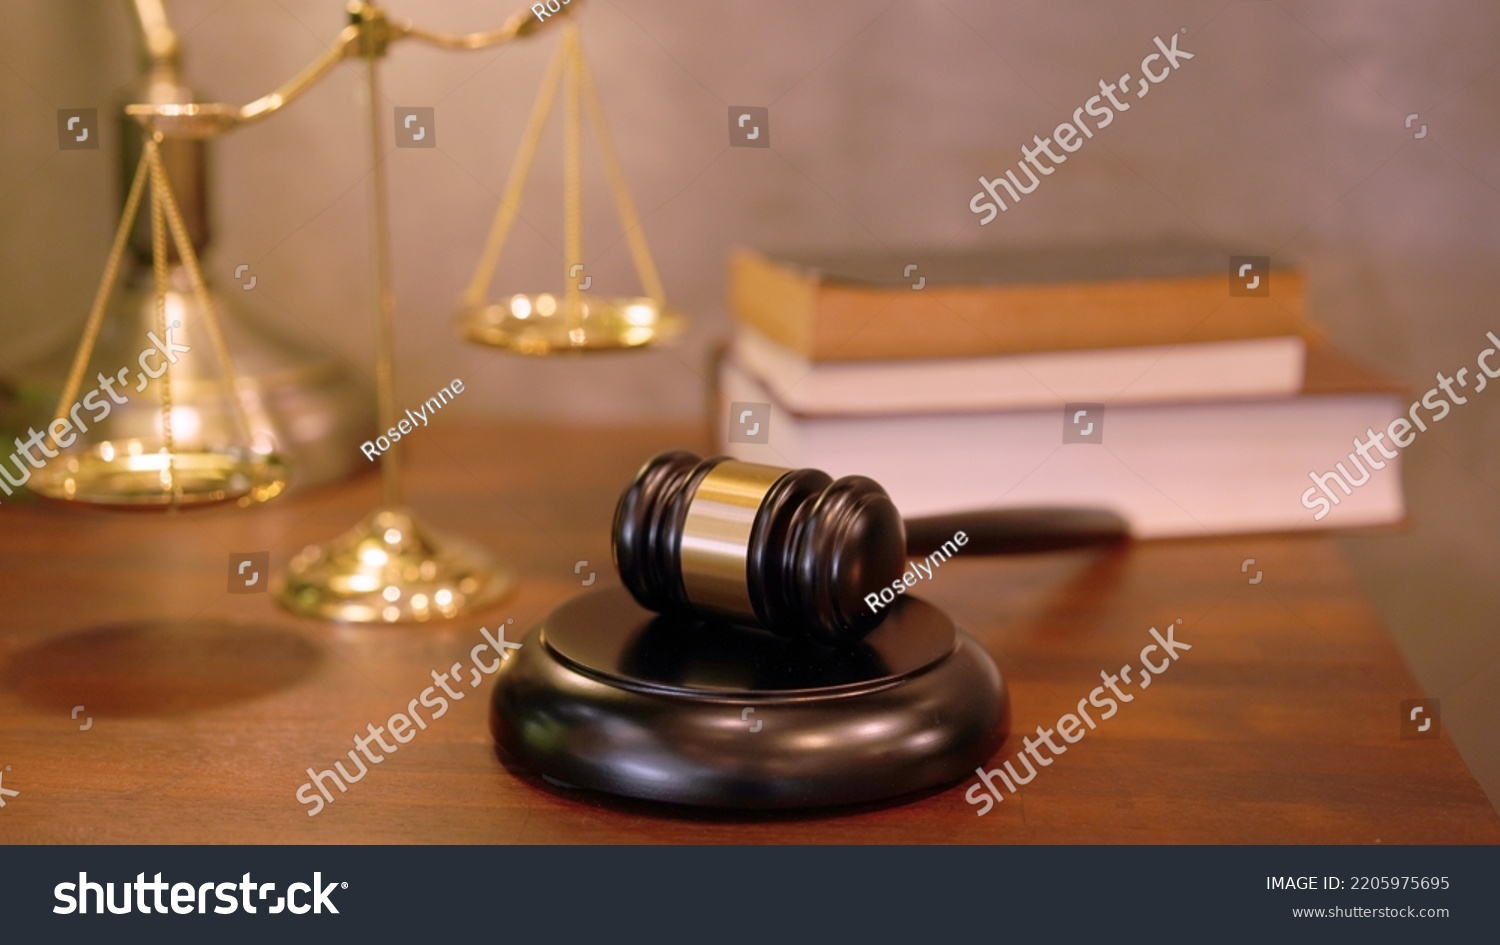 Lawyer or judge's hammer in the court. Auction's hammer is on woo table. Law subject or auction firm with book and golden judge's scale as symbol. #2205975695